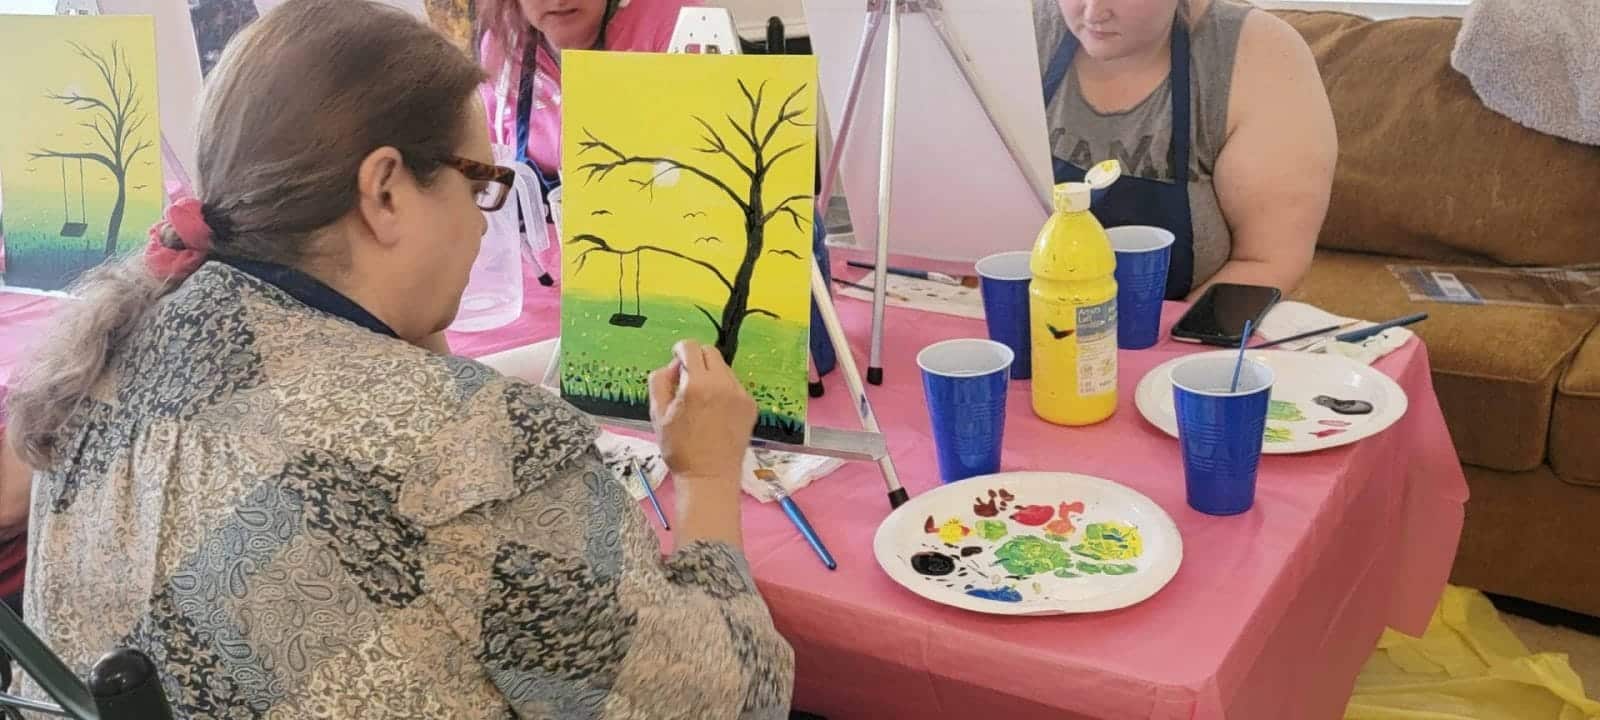 A woman participating in a paint and sip session, creating a masterpiece at a table.